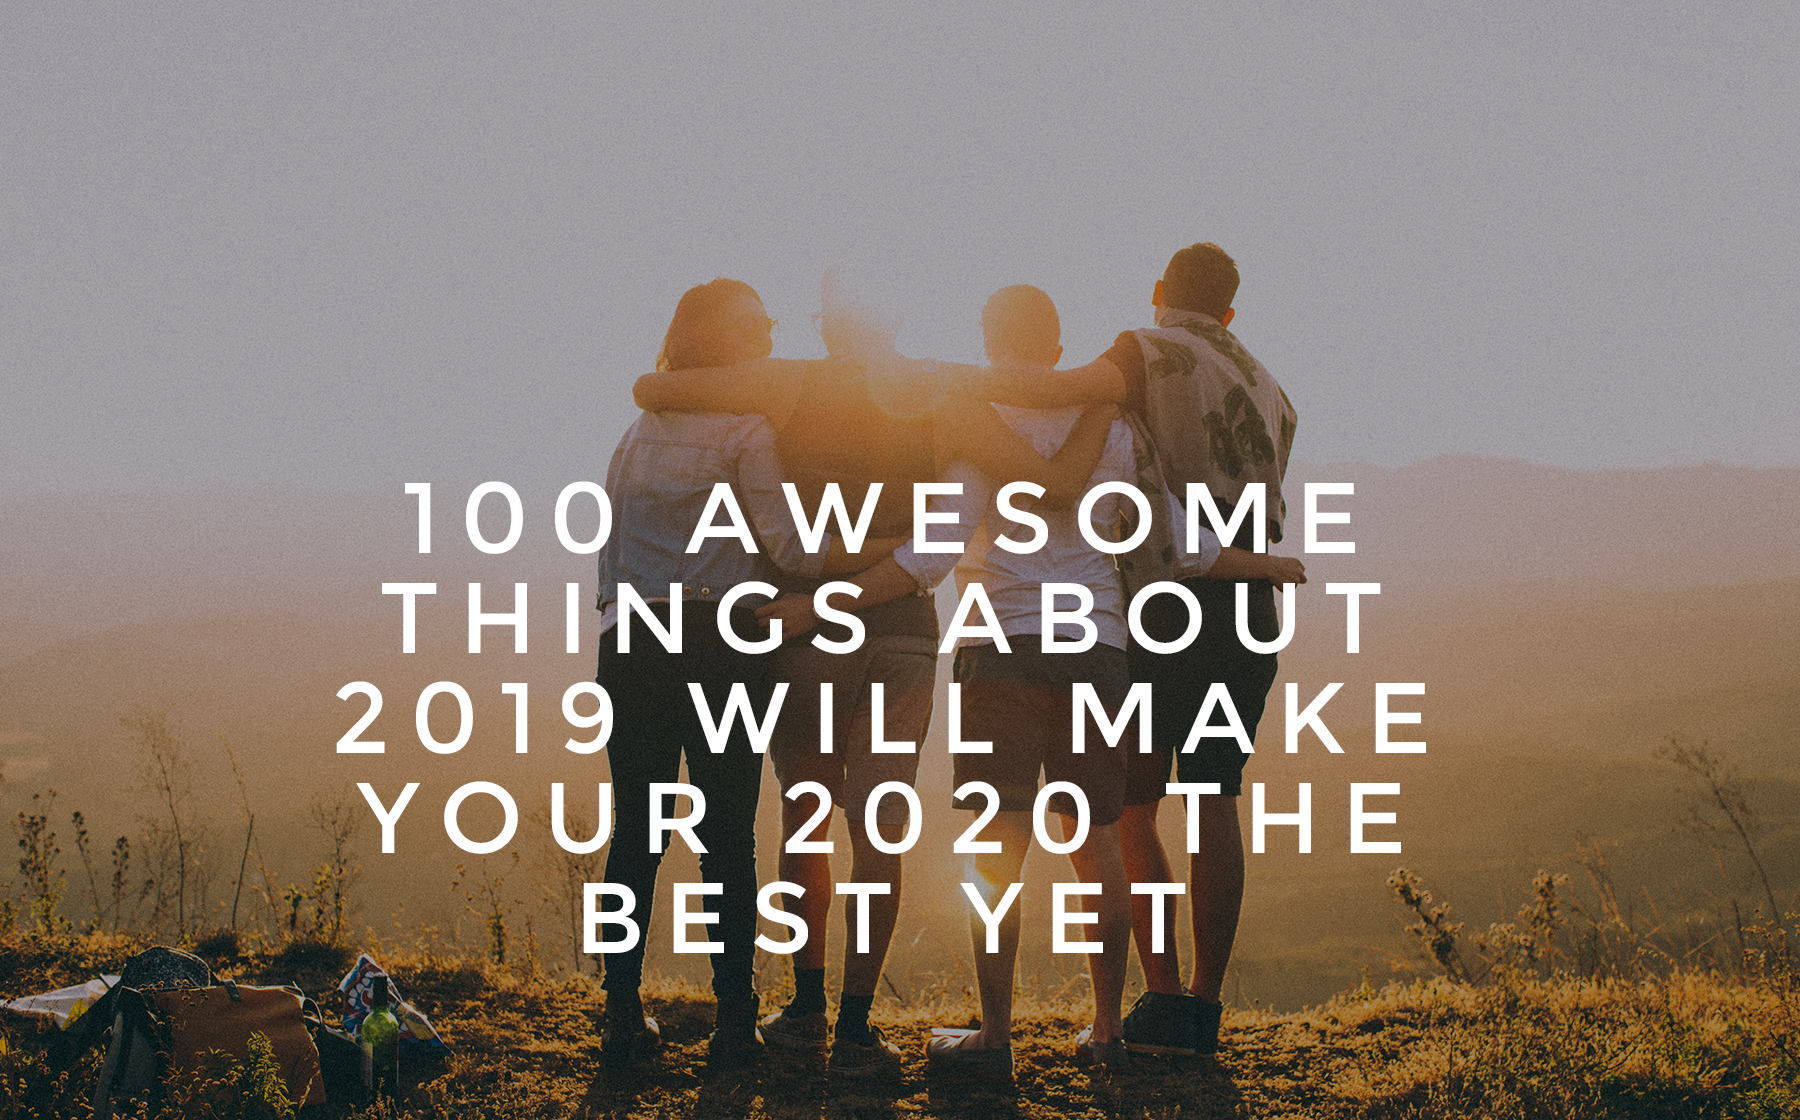 https://an.athletenetwork.com/blog/100-awesome-things?utm_campaign=coschedule&utm_source=facebook_page&utm_medium=Athlete+Network&utm_content=100+Awesome+Things+About+2019+Will+Make+Your+2020+The+Best+Yet&fbclid=IwAR12s2LuC4v1pUO5xvisI-NIefWcOMhf0Czy17tRy-gaZmGLWjLHPhcVJ4s